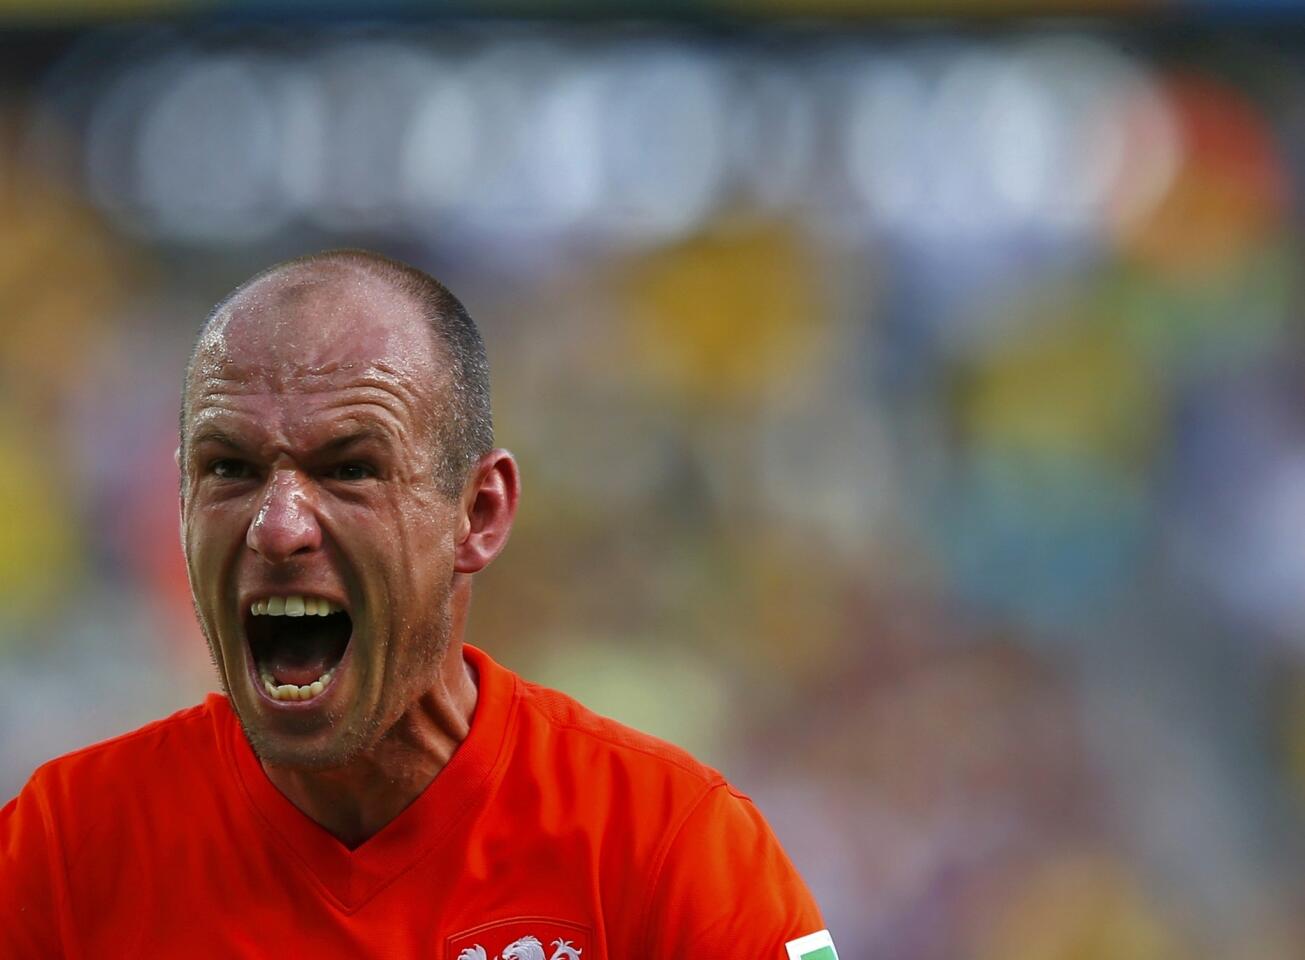 Arjen Robben of the Netherlands celebrates after winning their 2014 World Cup round of 16 game against Mexico at the Castelao arena in Fortaleza